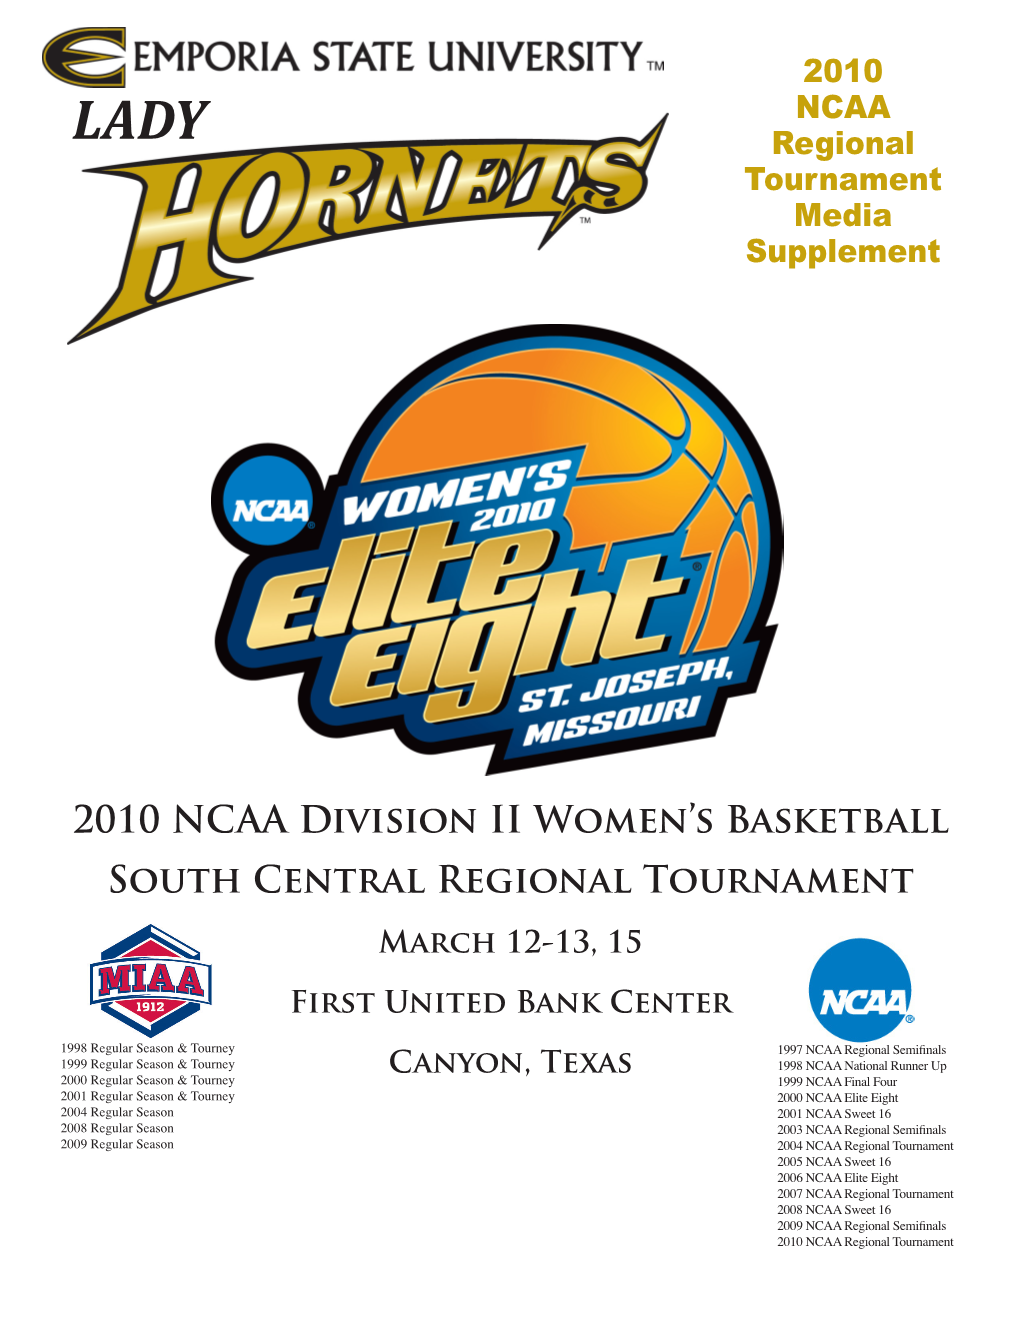 2010 NCAA Division II Women's Basketball South Central Regional Tournament